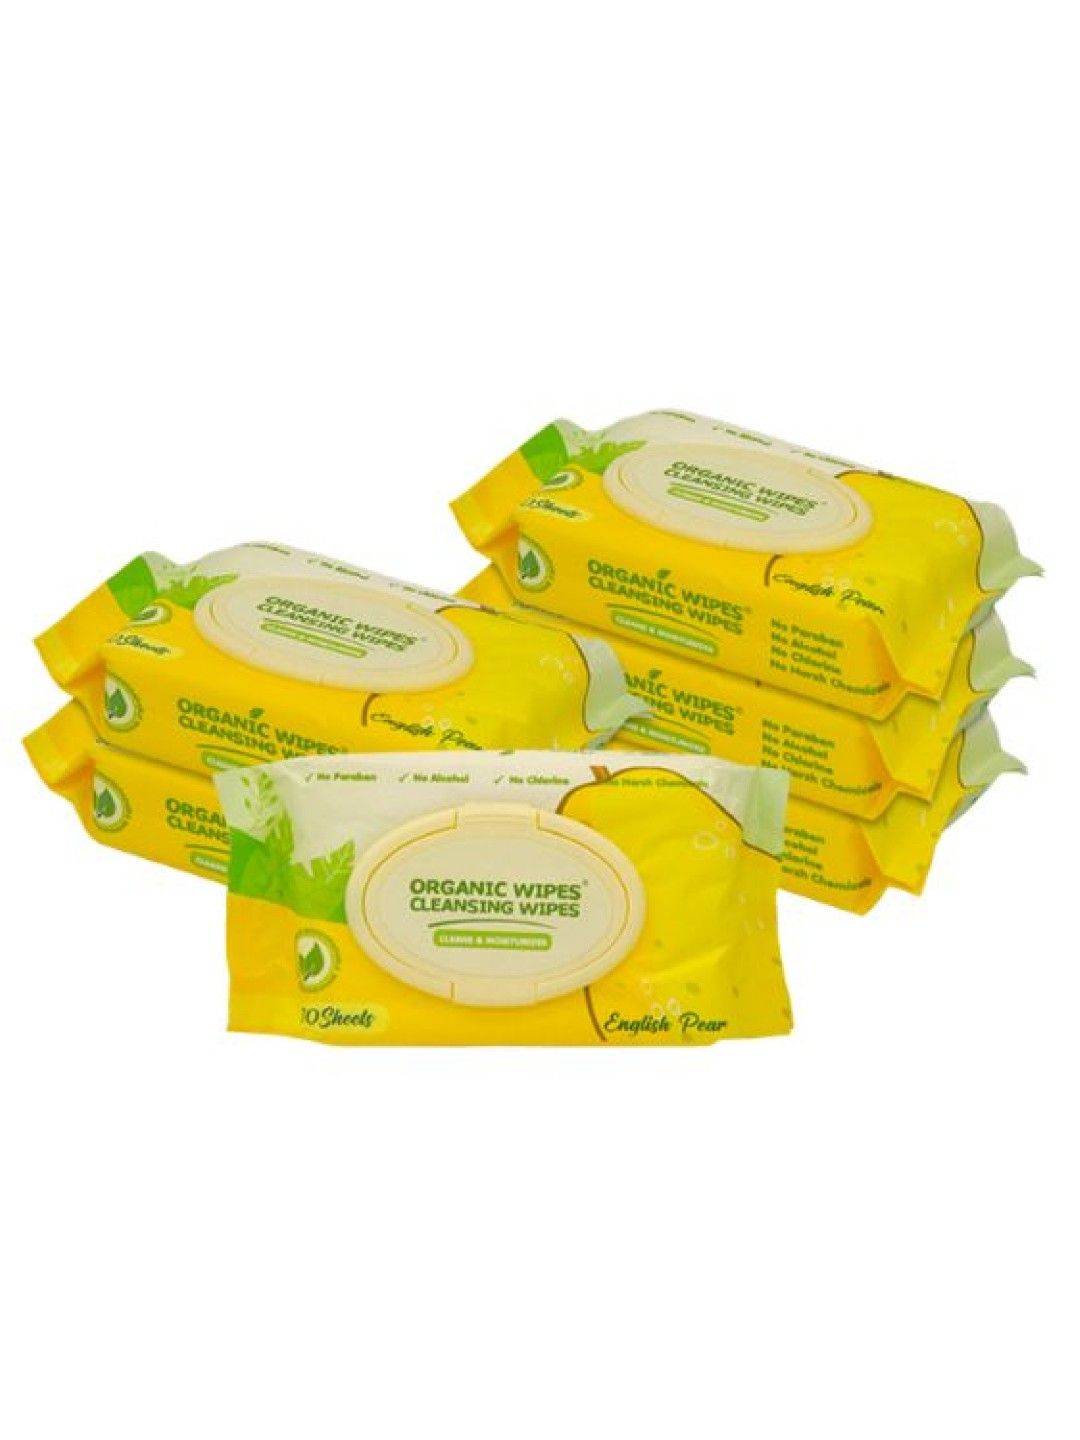 Organic Baby Wipes Organic Wipes Cleansing Wipes English Pear (70s x 6-pack)